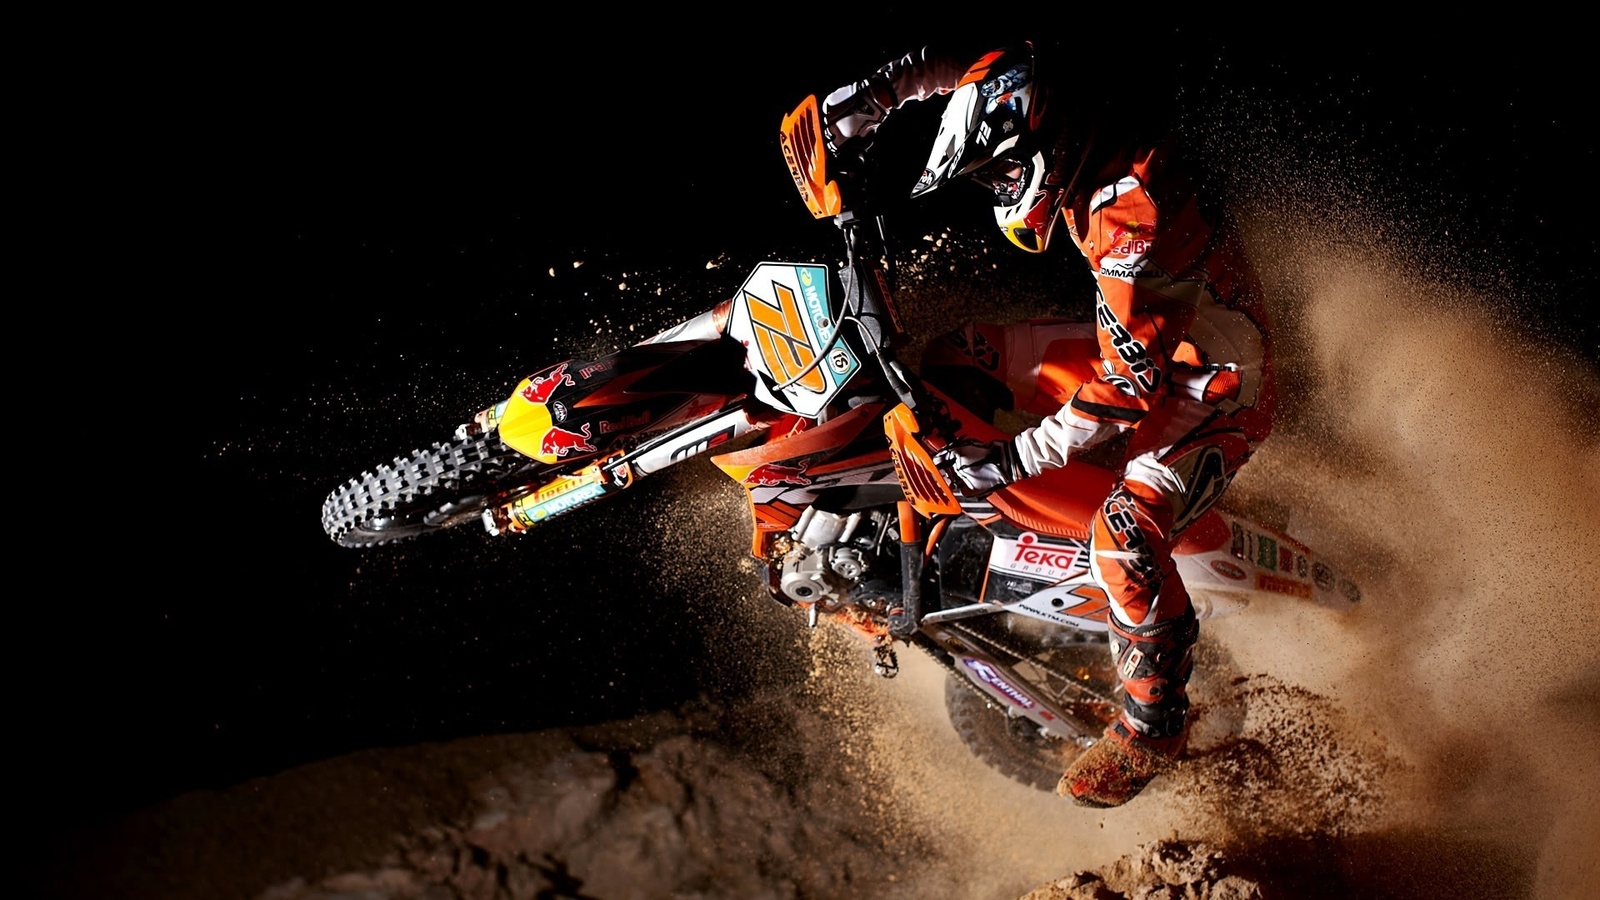 red bull, 2011, x-fighters, x-games 1920x1200 hd wallpapers, 1920x1200, Ktm, motocross